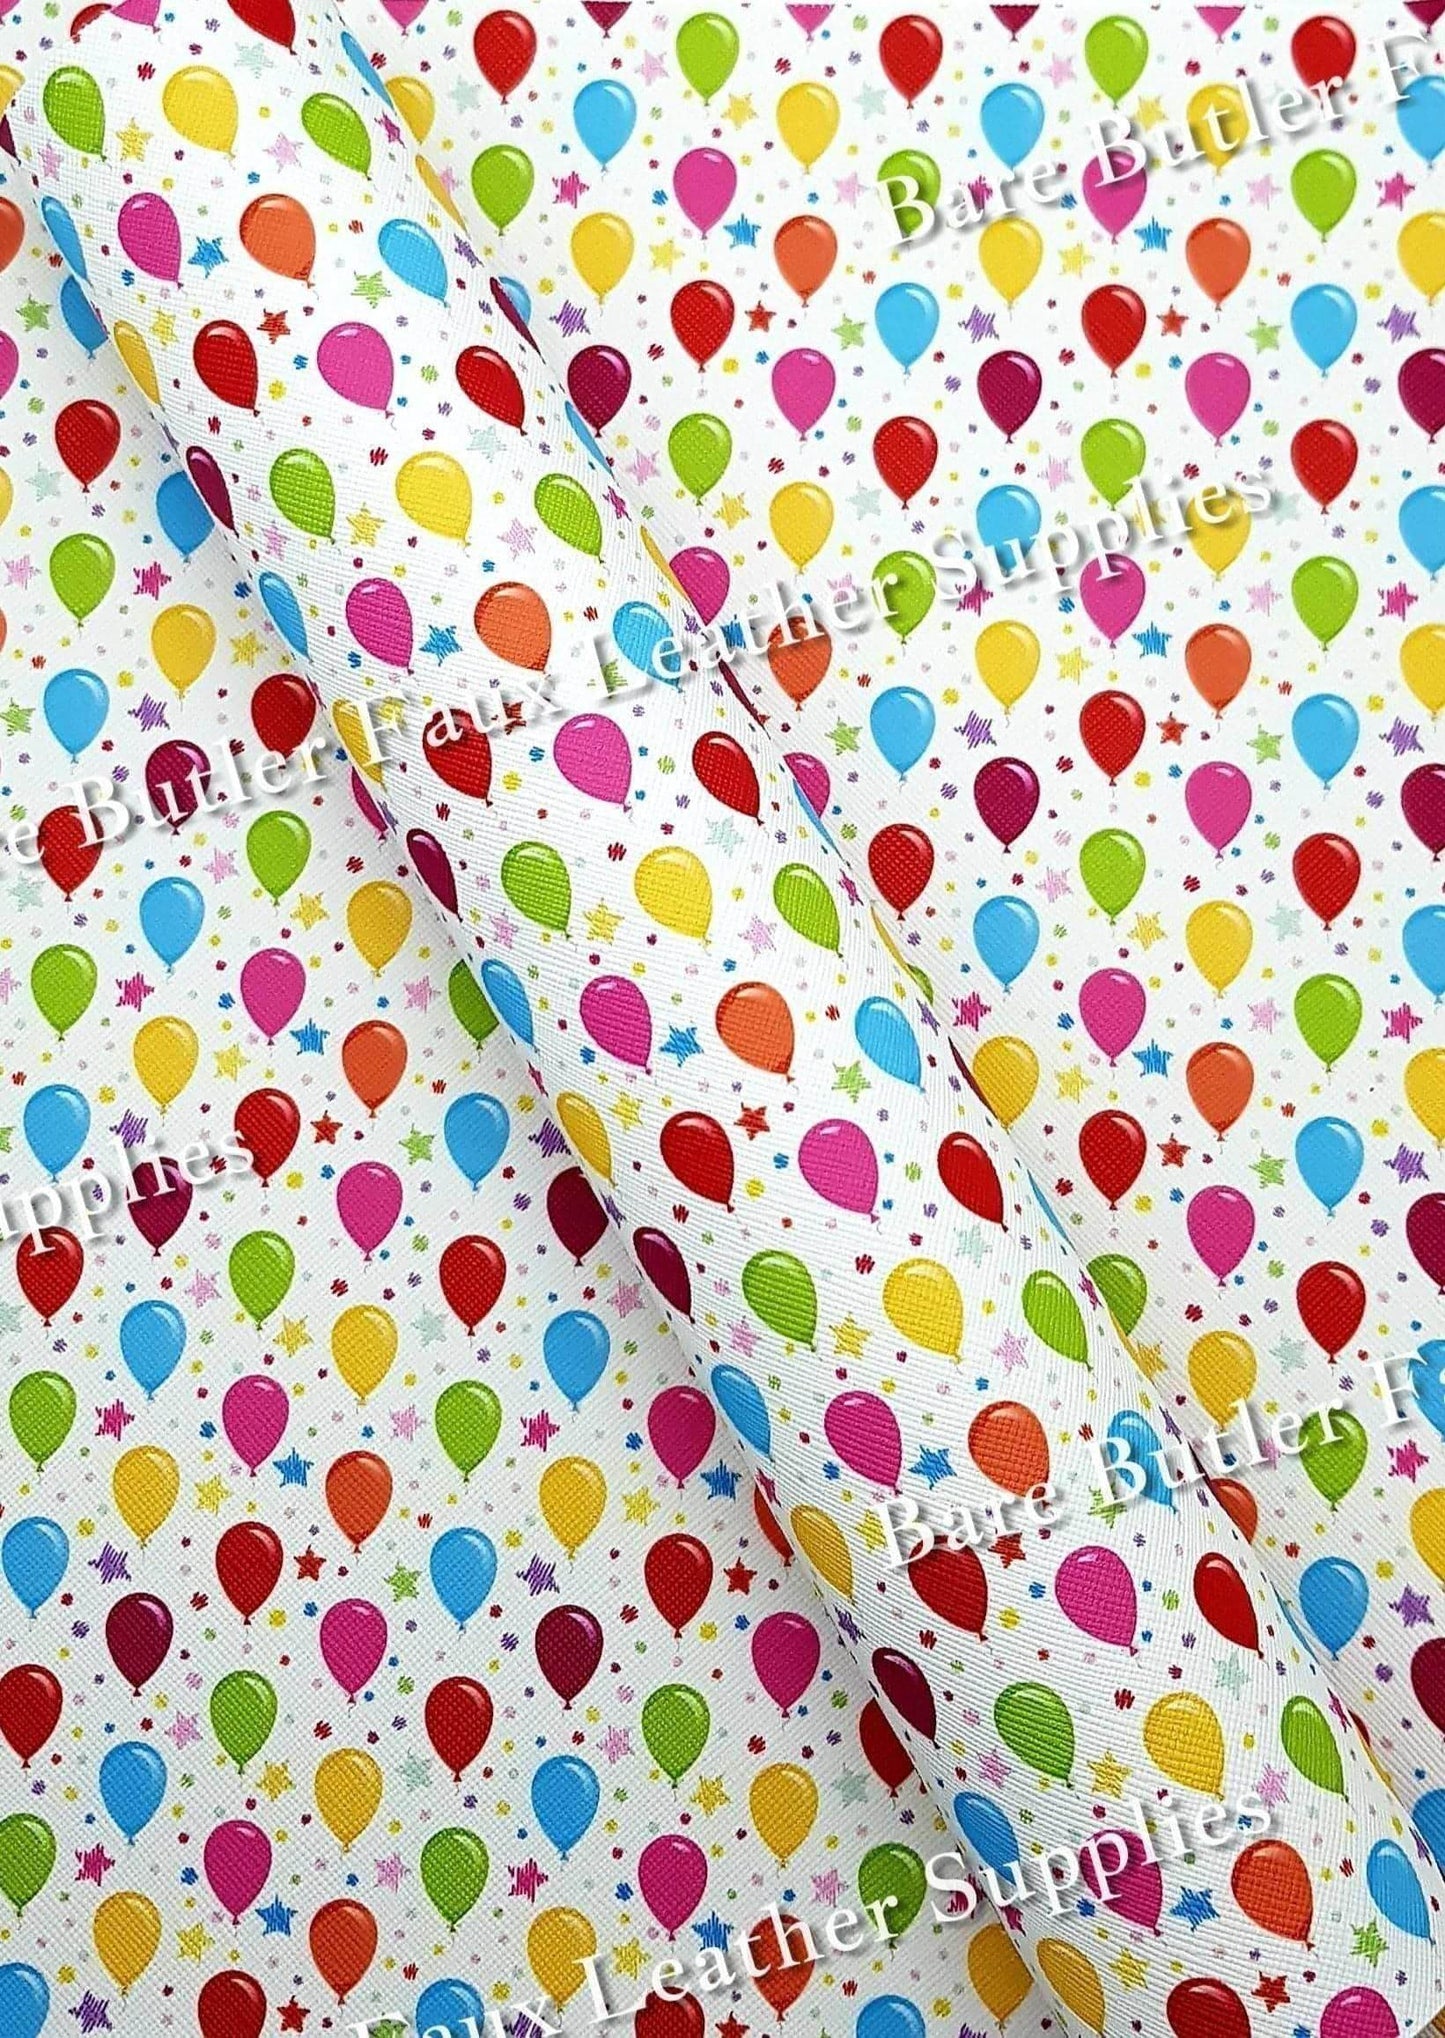 Colourful Balloons Faux Leather - balloon, birthday, colourful, Faux, Faux Leather, Leather, leatherette, party - Bare Butler Faux Leather Supplies 